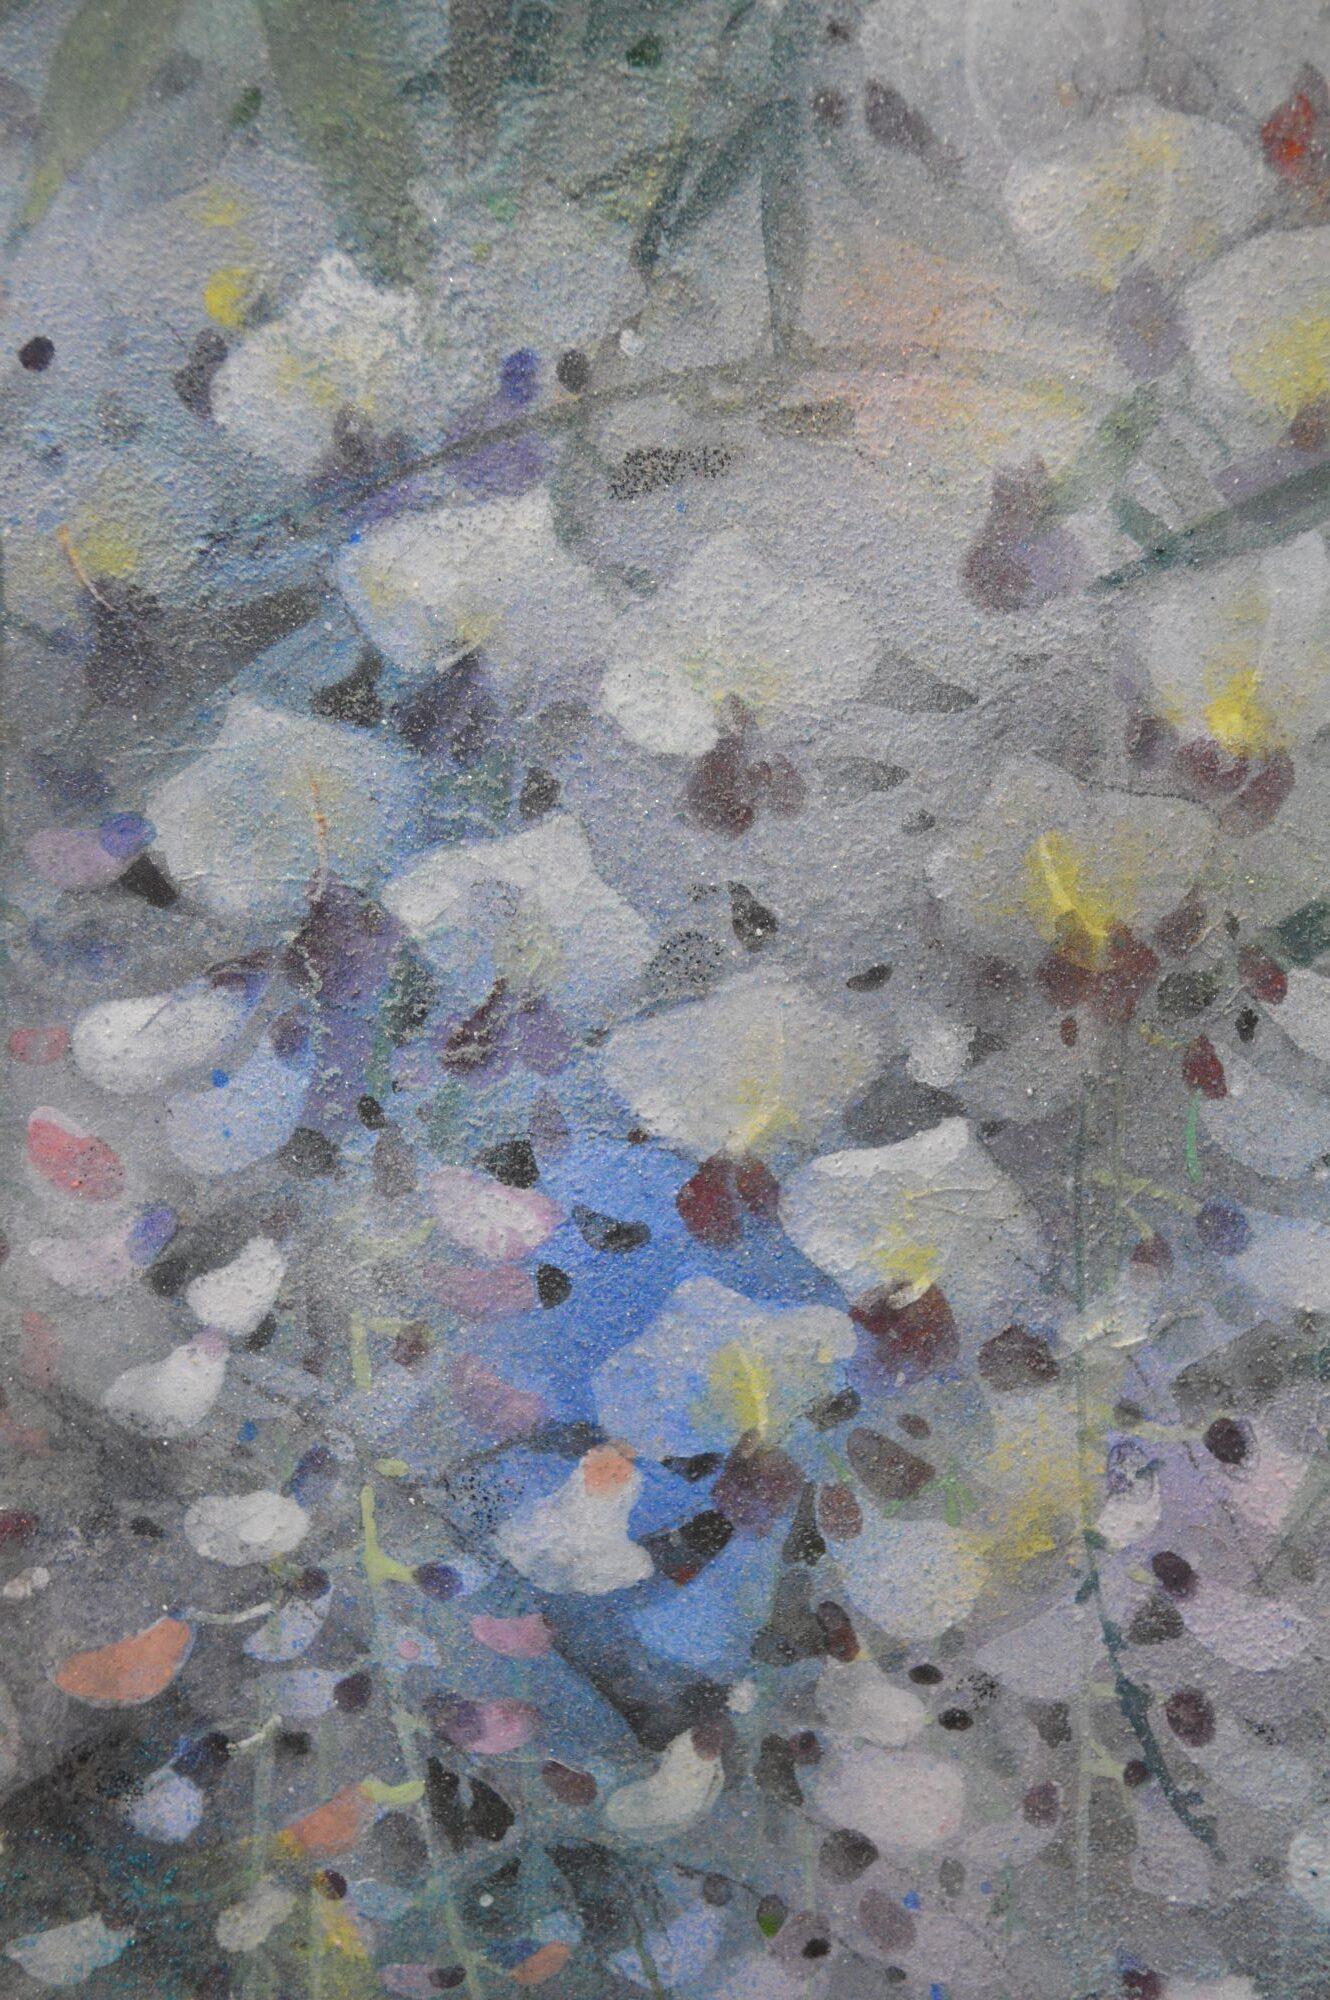 Bellflowers is a unique painting by contemporary artist Chen Yiching. The painting is made with mineral pigments, Japanese paper mounted on wood, dimensions are 61 × 50 cm (24 × 19.7 in). Dimensions of the framed (white frame) artwork are 66 x 55 cm